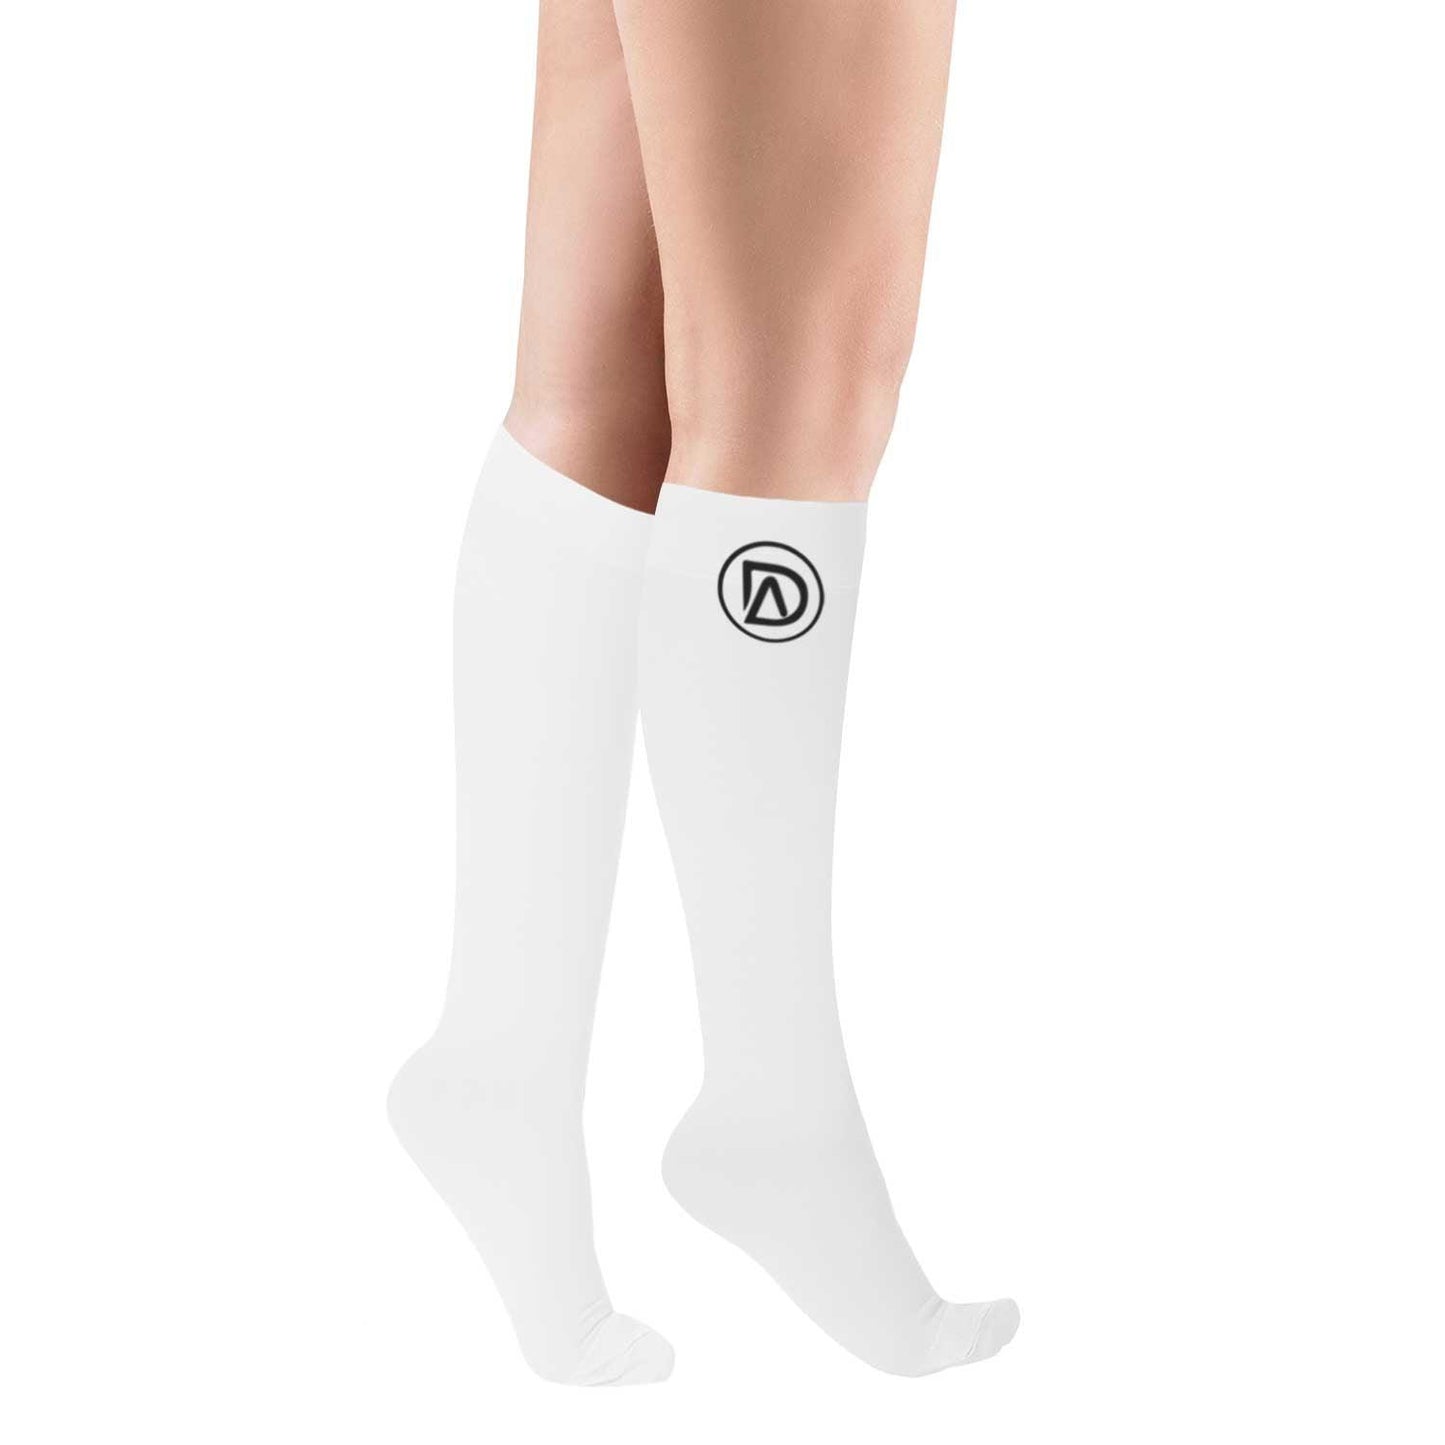 Plus Size Compression Socks 20-30 mmHg | Wide Calf by Dominion Active - TheGivenGet